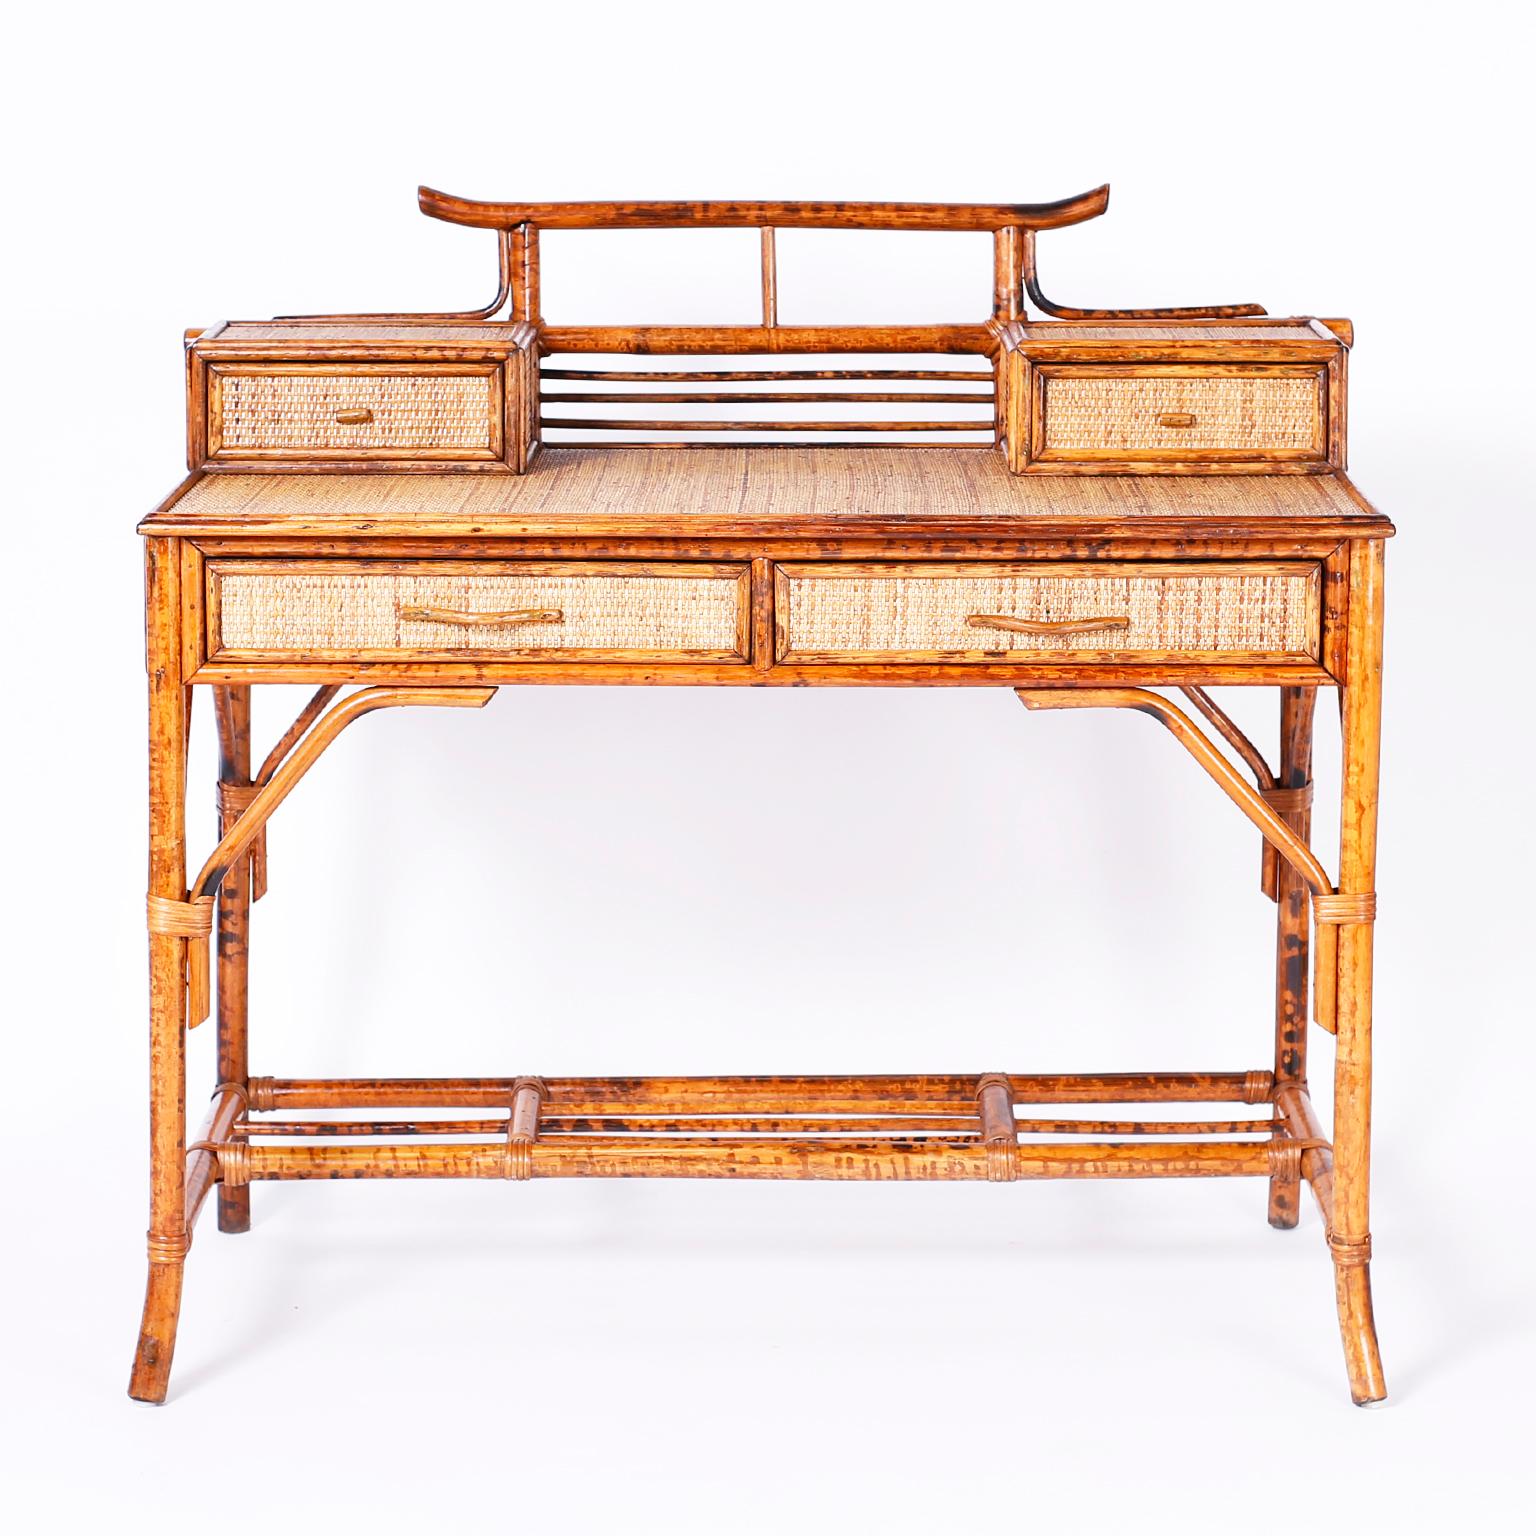 British colonial style desk with a tortoiseshell bamboo frame including a pagoda shaped gallery and grasscloth surfaces.